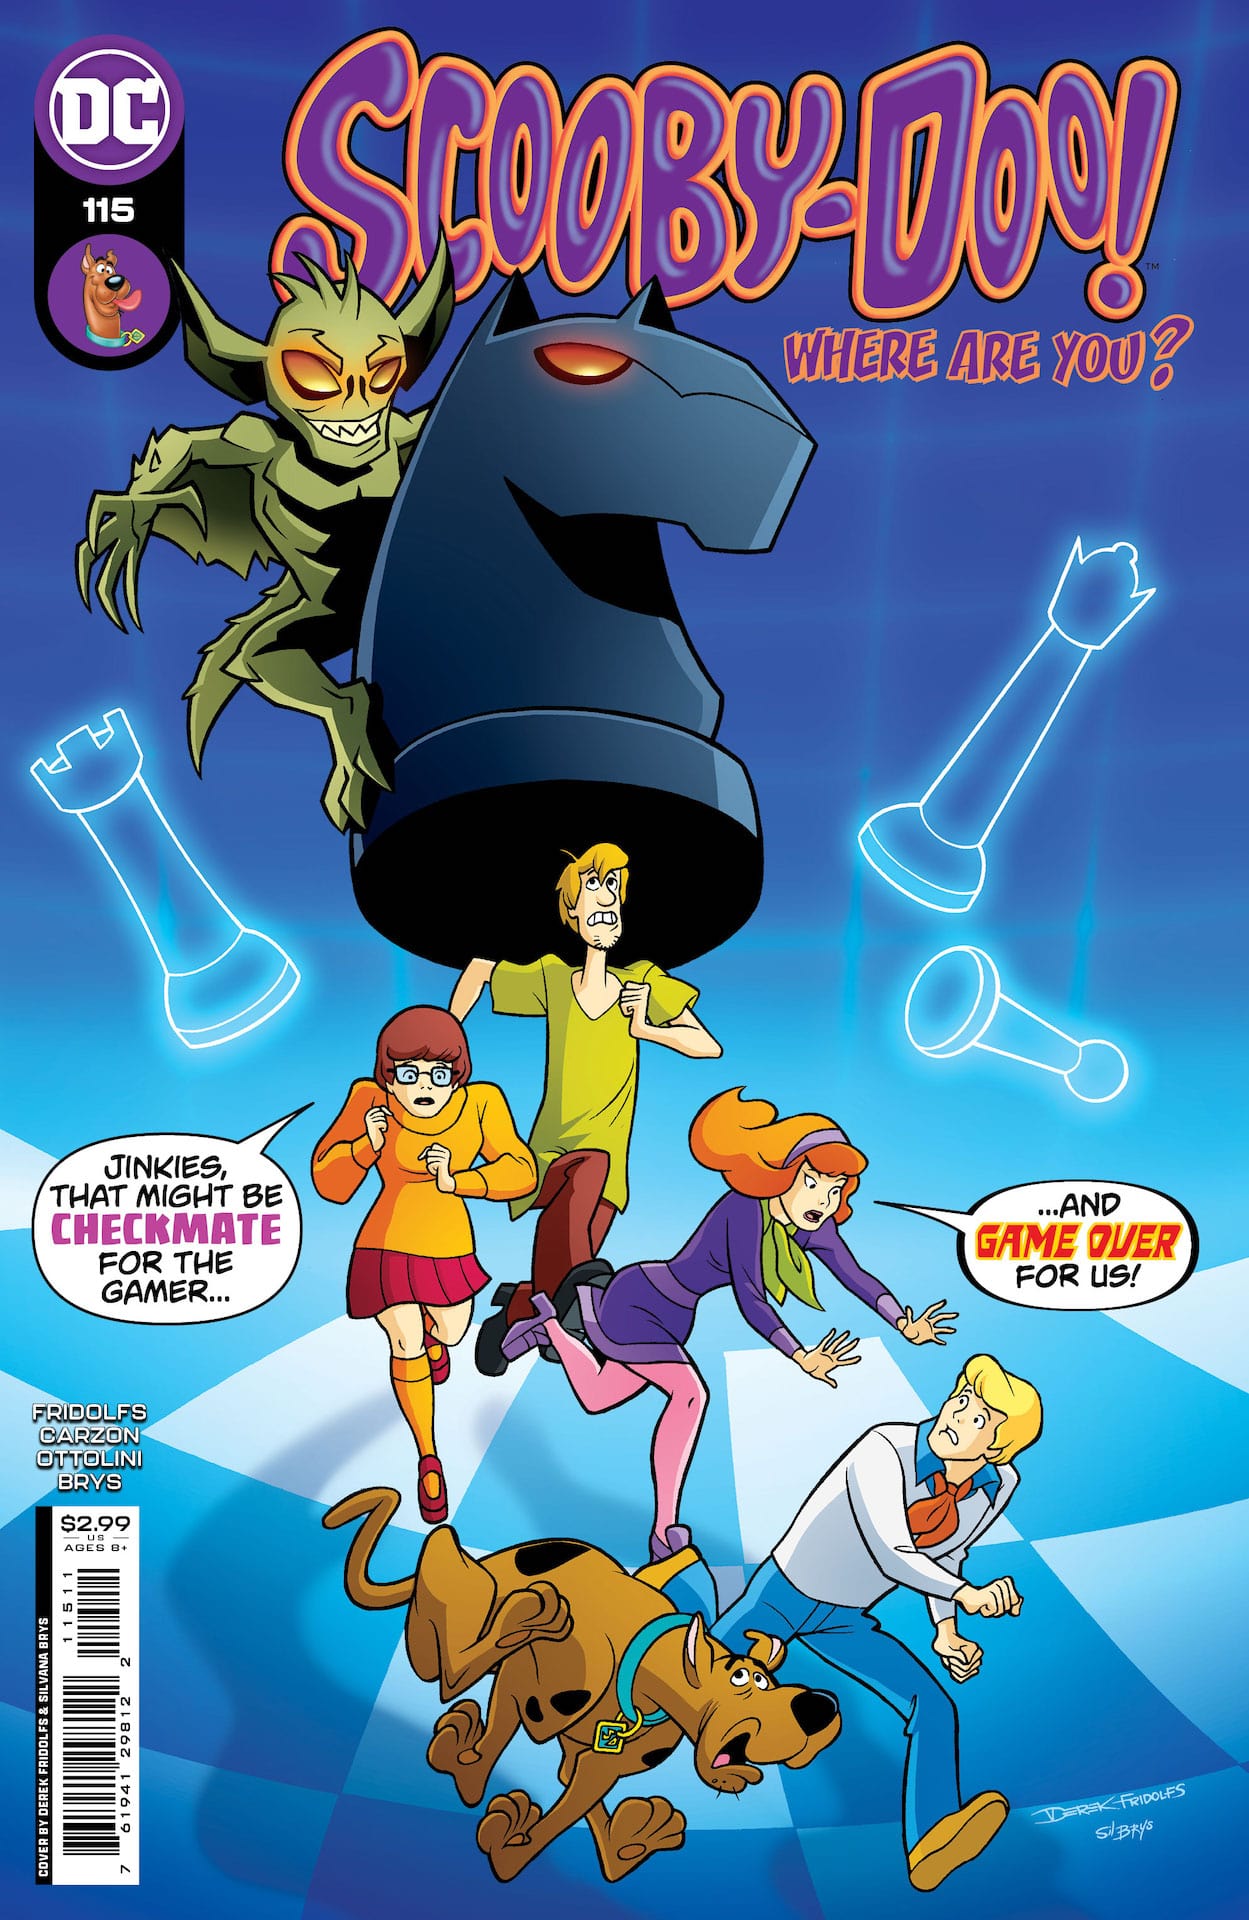 DC Preview: Scooby-Doo, Where Are You? #115